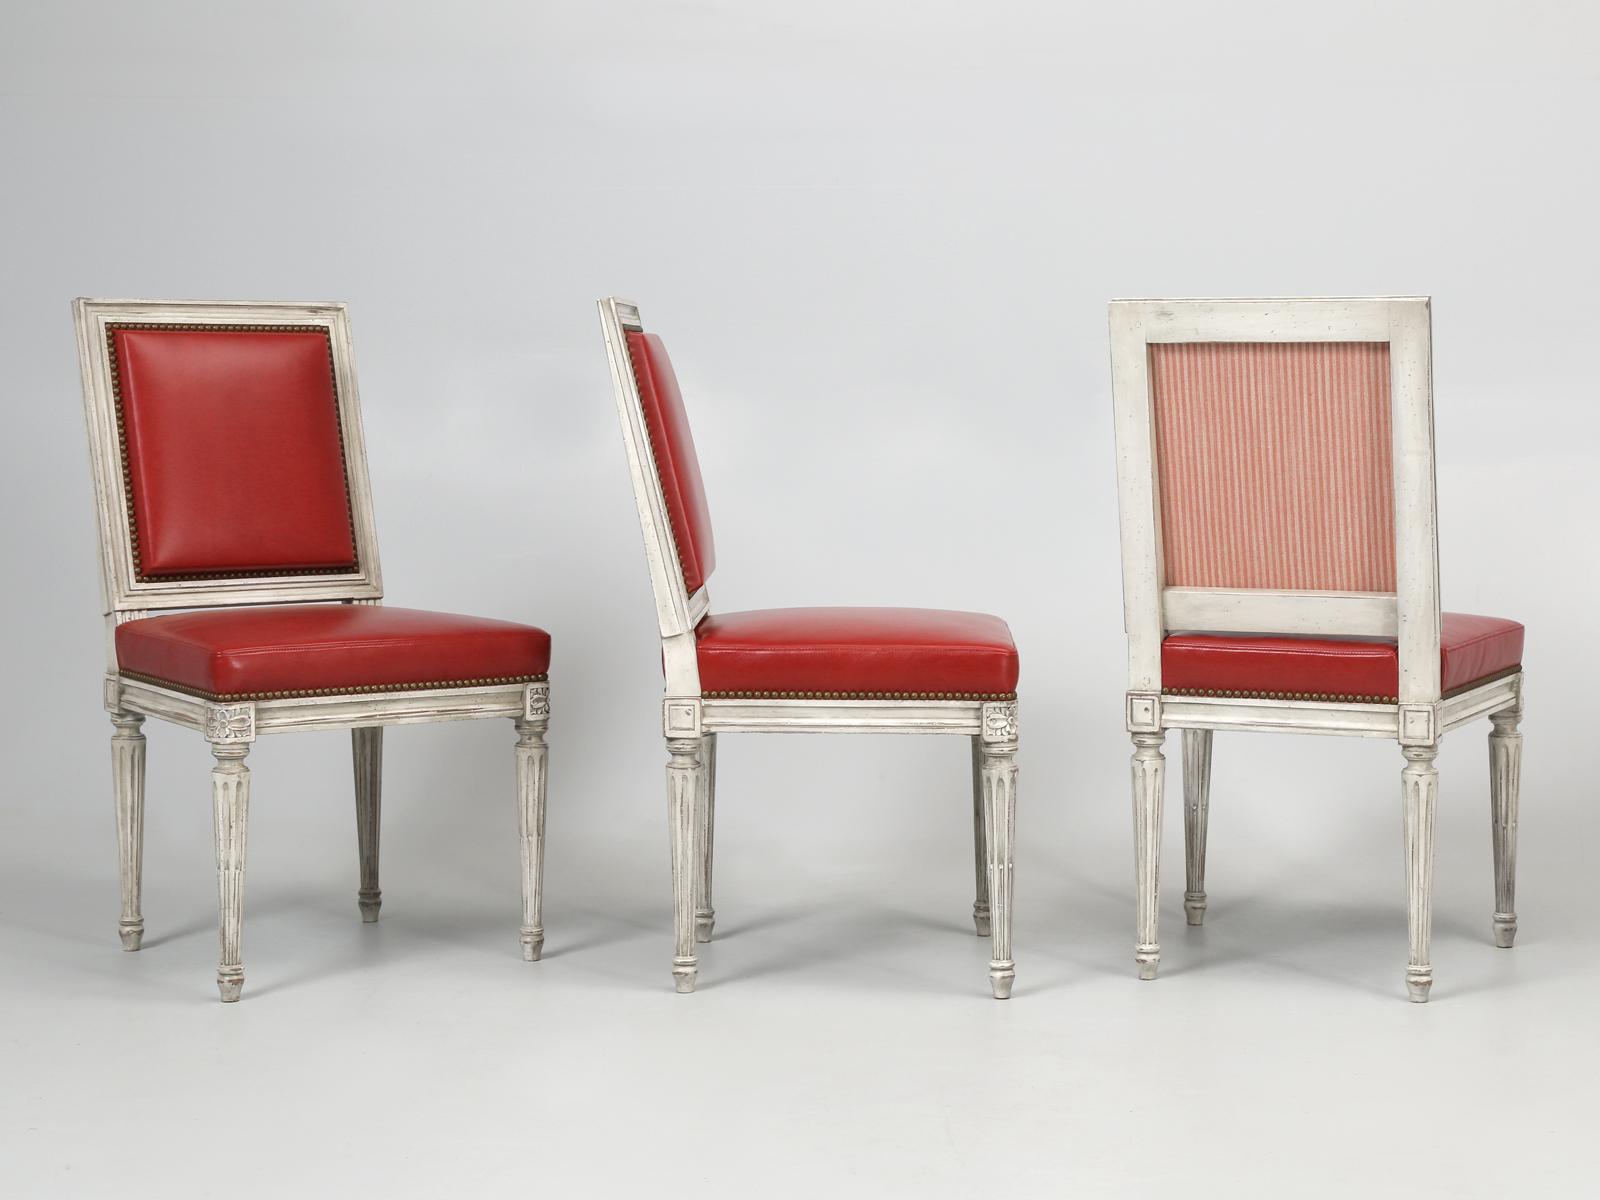 Although these Louis XVI dining chairs were built for a specific designer, we thought that they were exceptional and opted to feature the Louis XVI dining chairs in a brilliant red leather. Old Plank offers our French Louis XVI hand-made chairs in